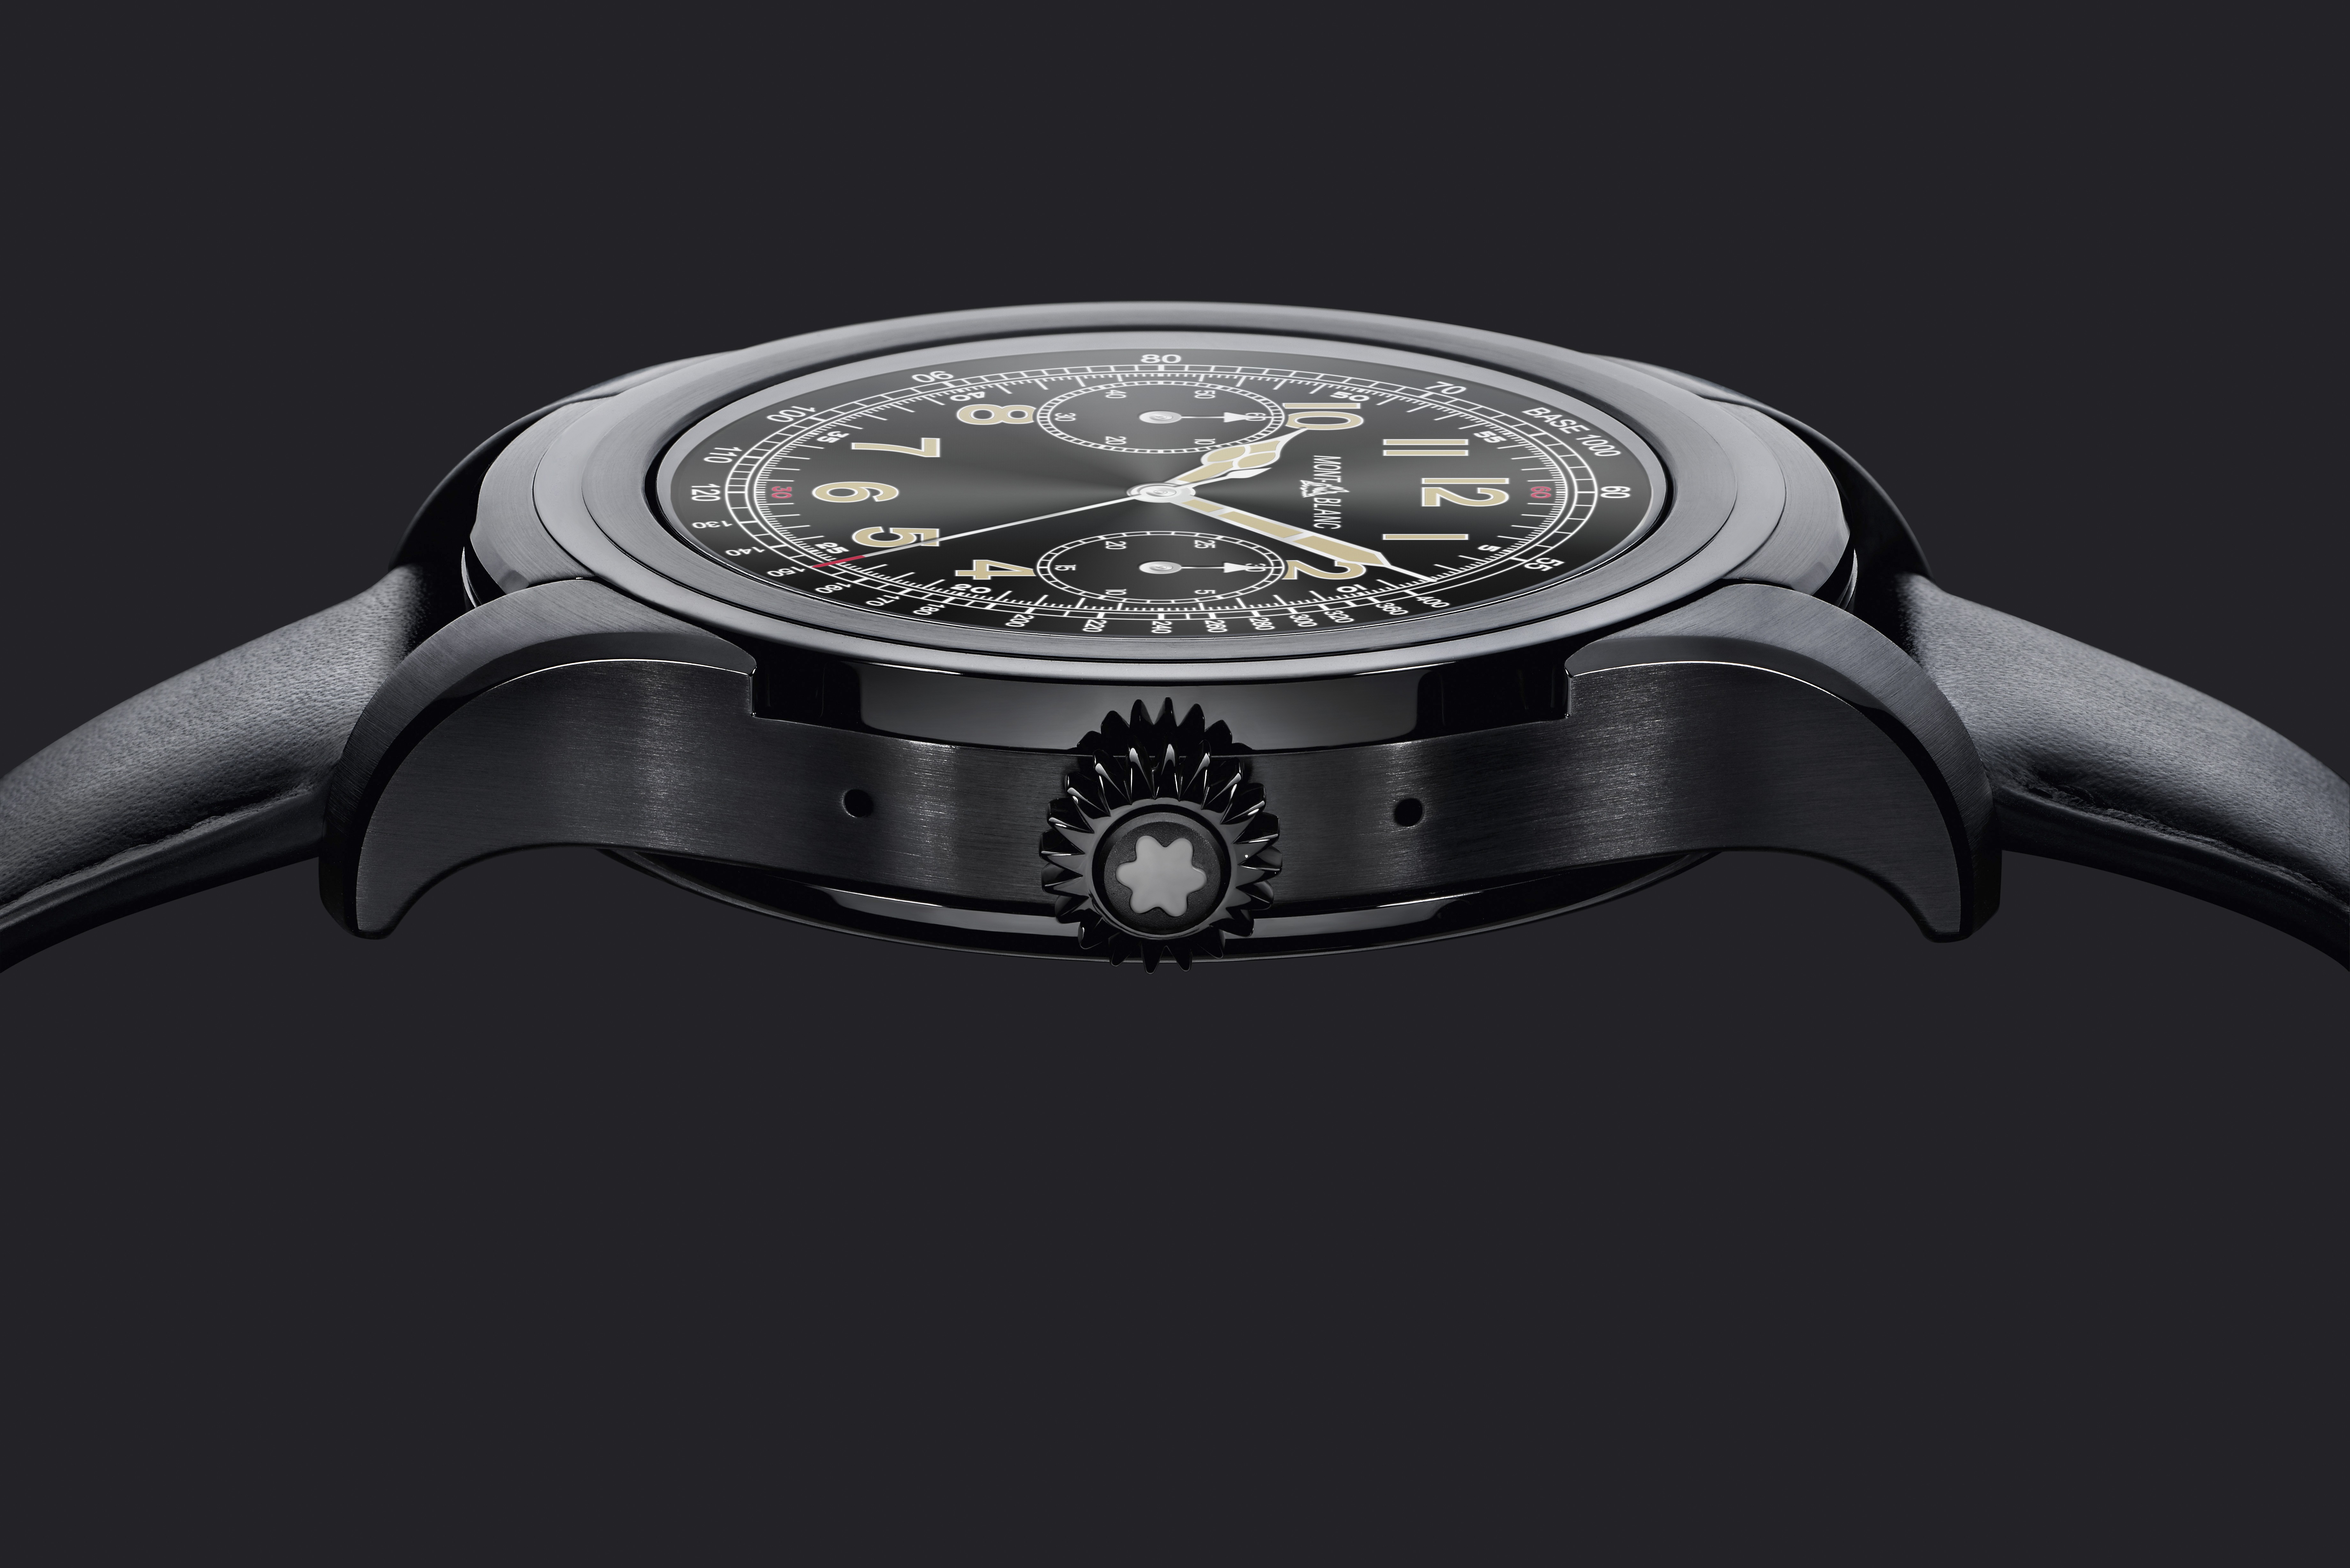 Side view of the Montblanc Summit smartwatch.